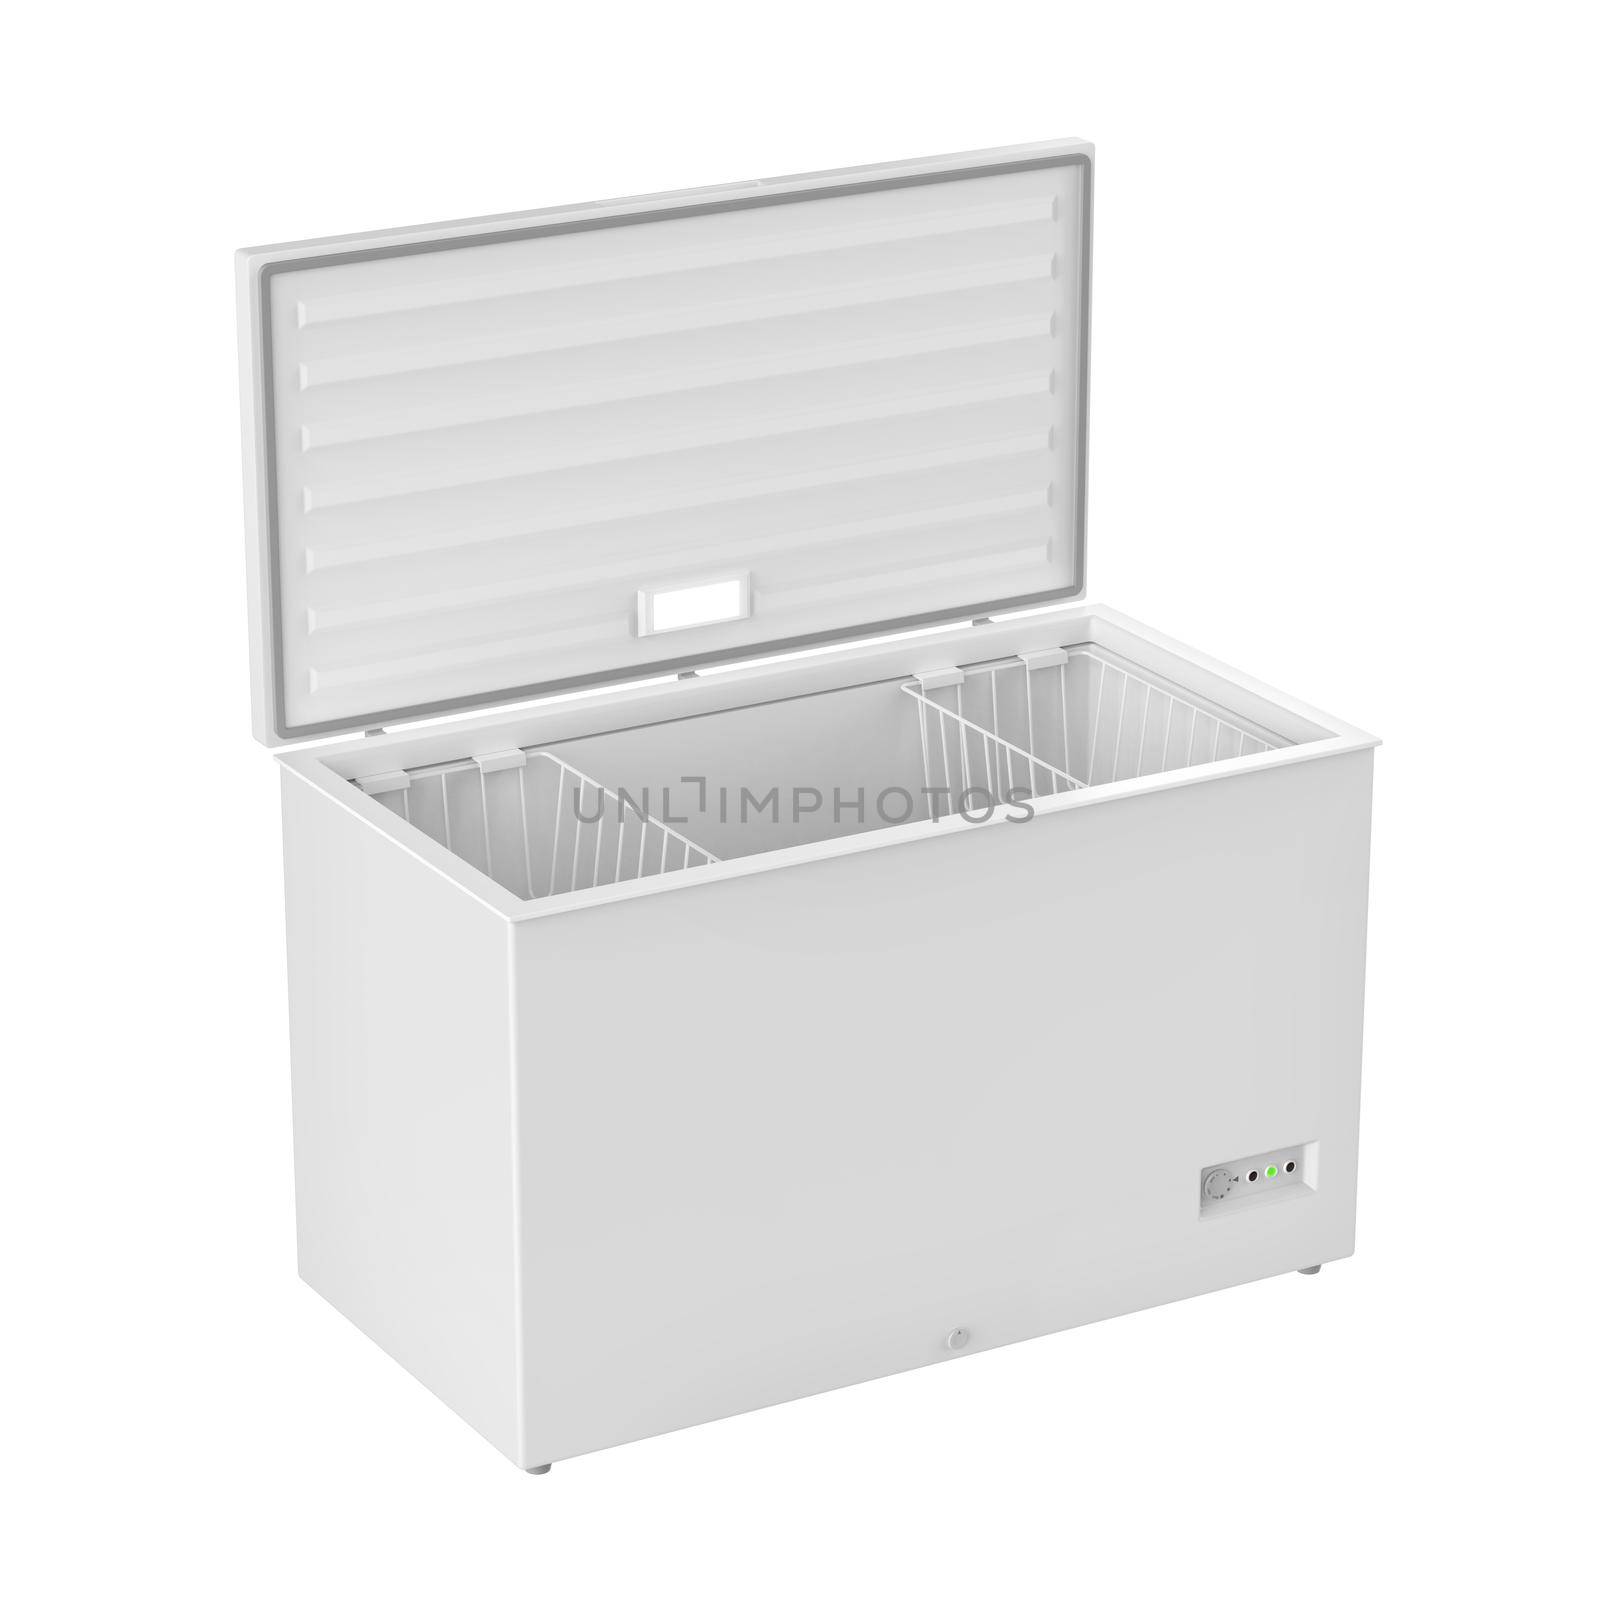 Open chest freezer by magraphics